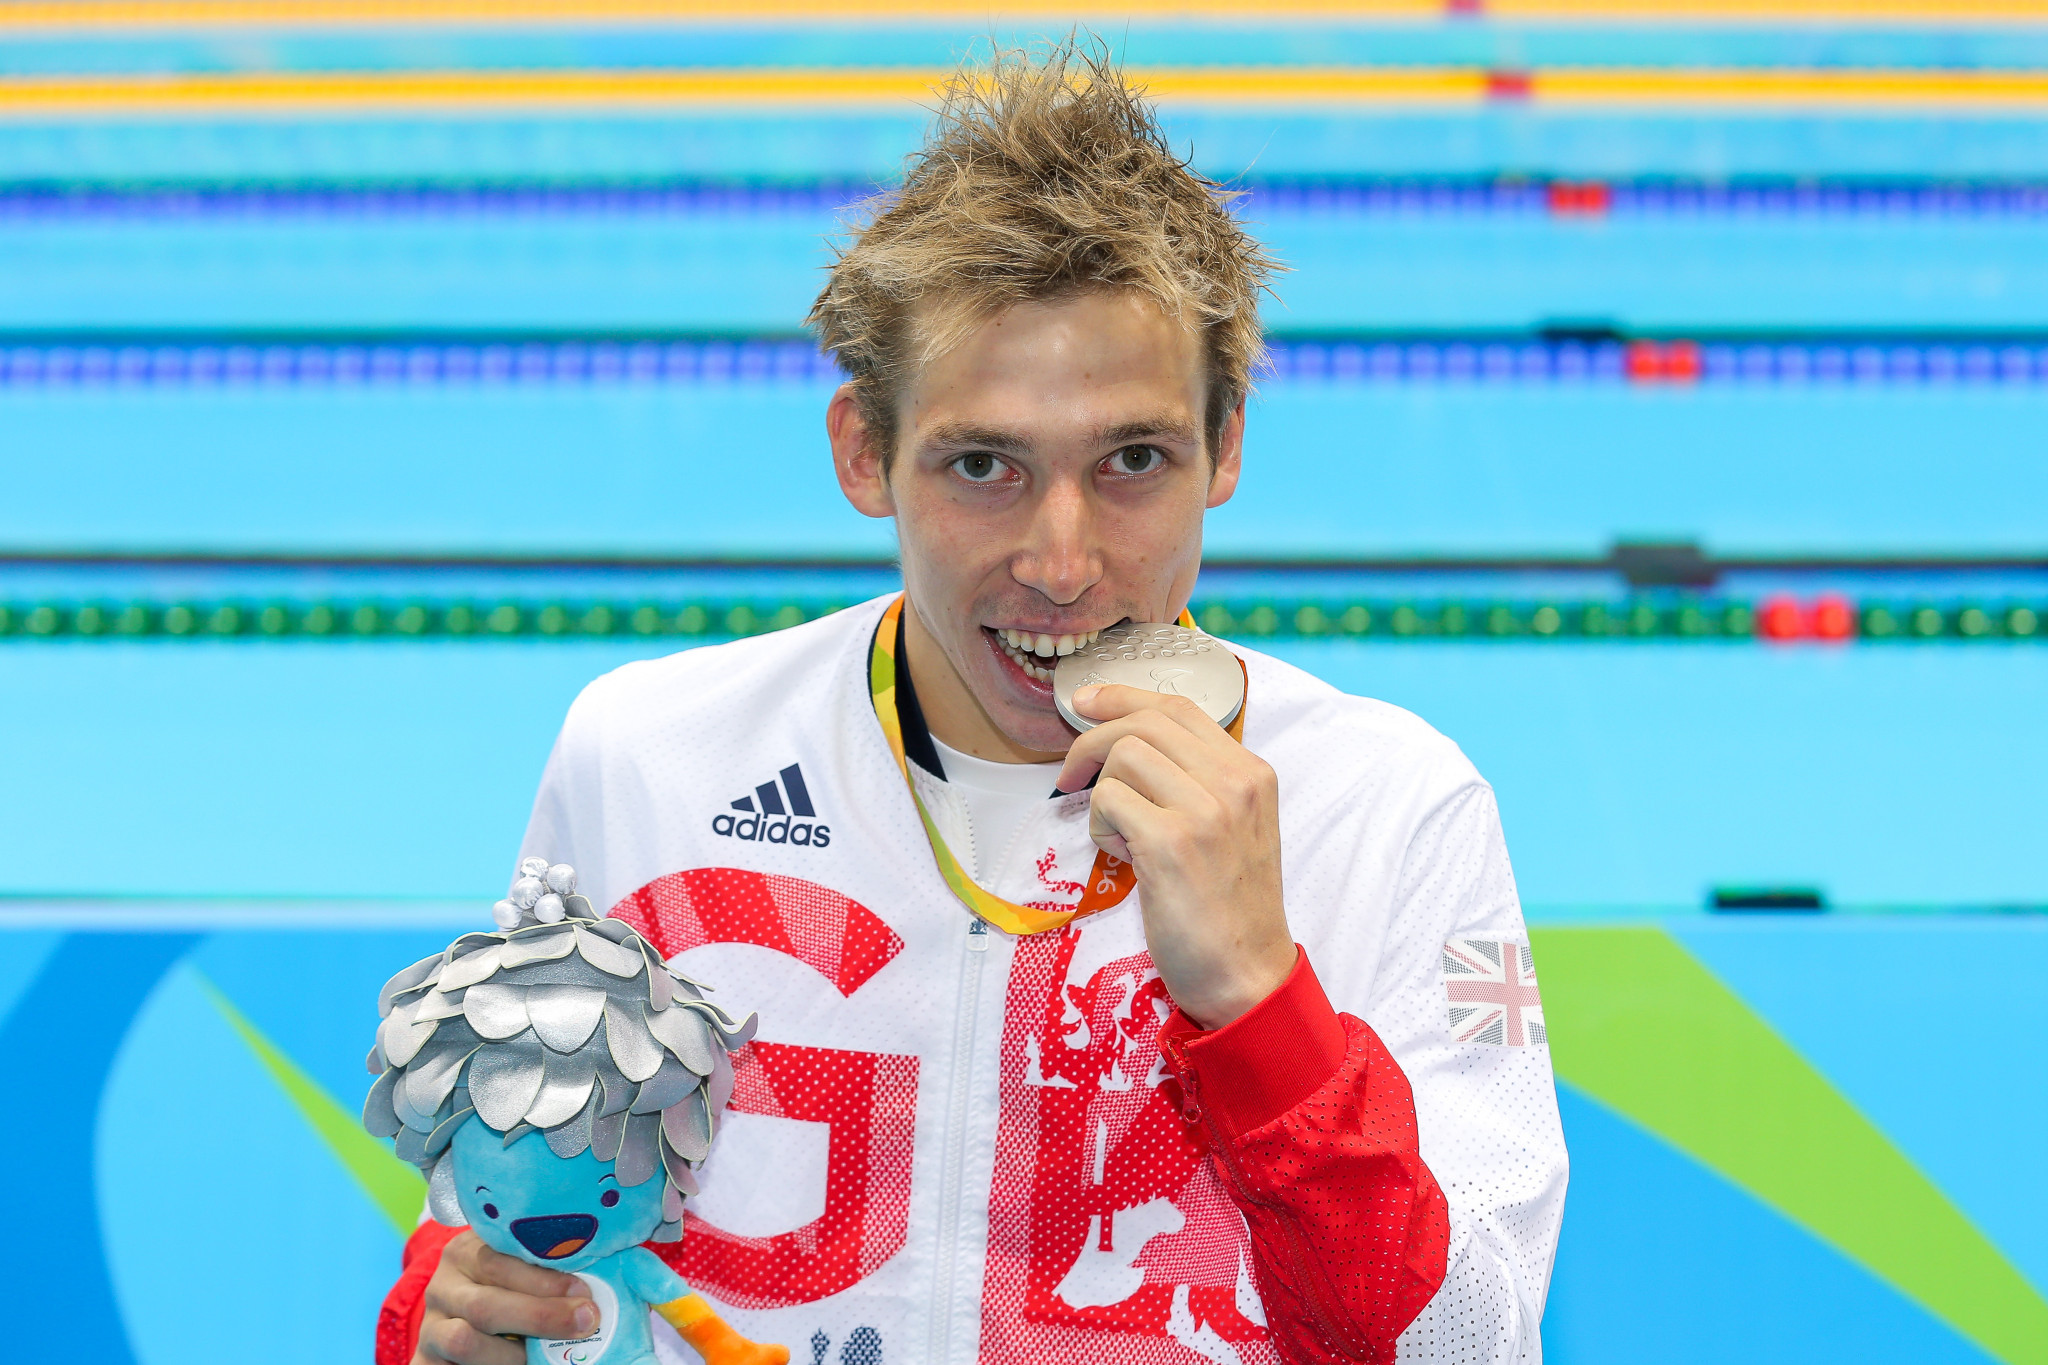 London 2012 Paralympic champion Jonathan Fox has announced his retirement from swimming because of illness and reclassification ©British Swimming 